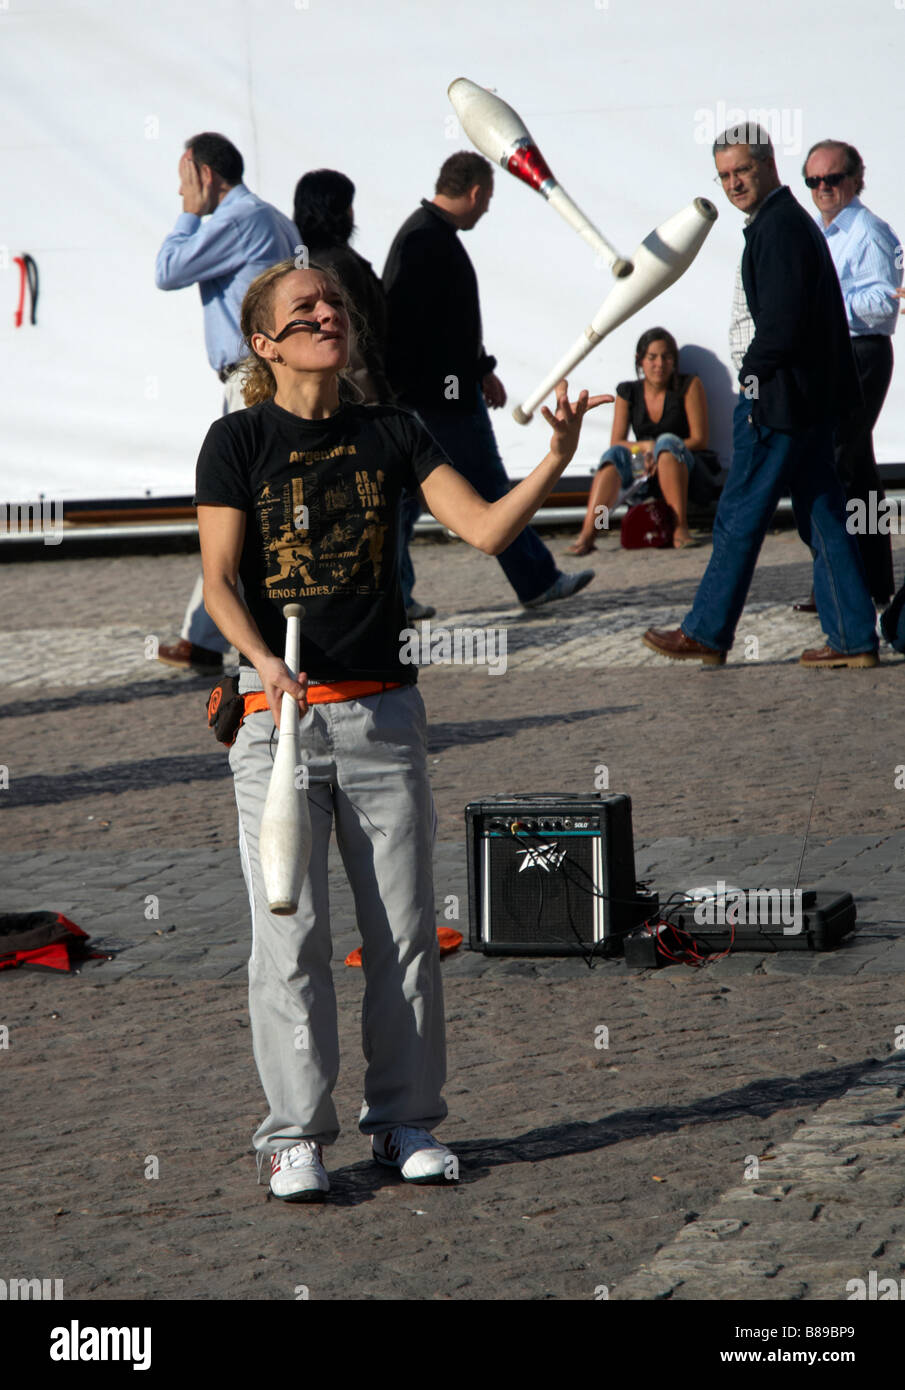 A young woman juggles for passers-by on Plaza Mayor, Madrid, Spain Stock Photo